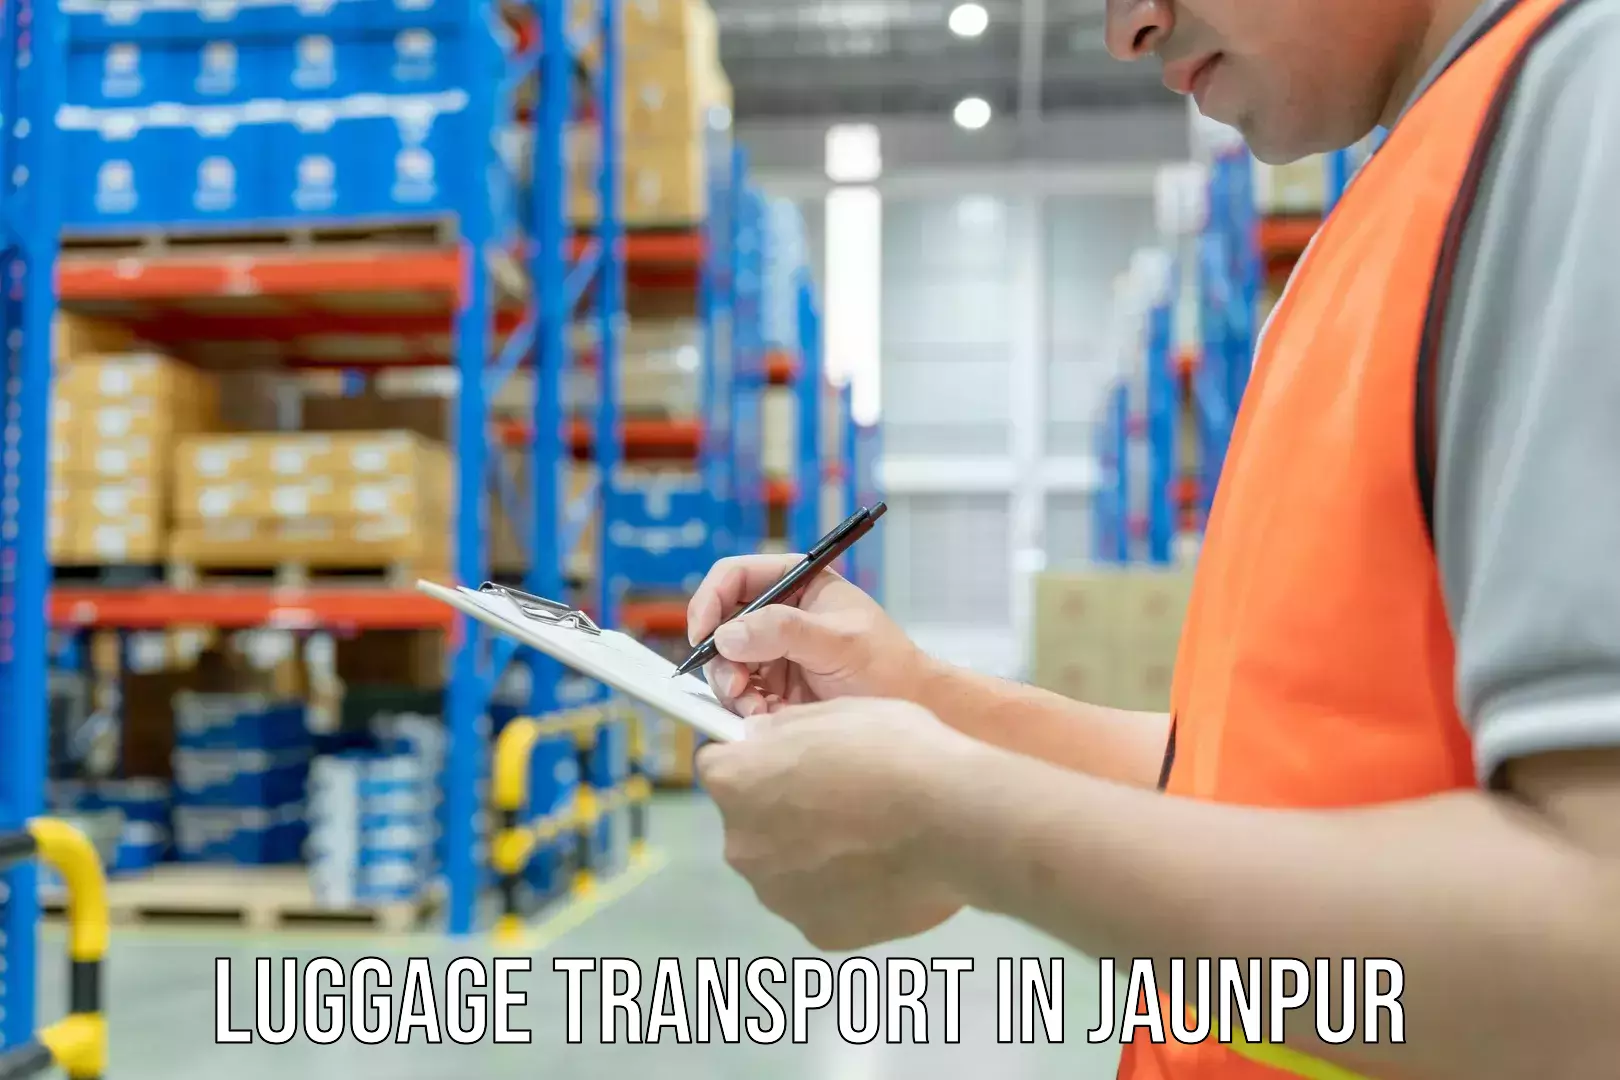 Automated luggage transport in Jaunpur